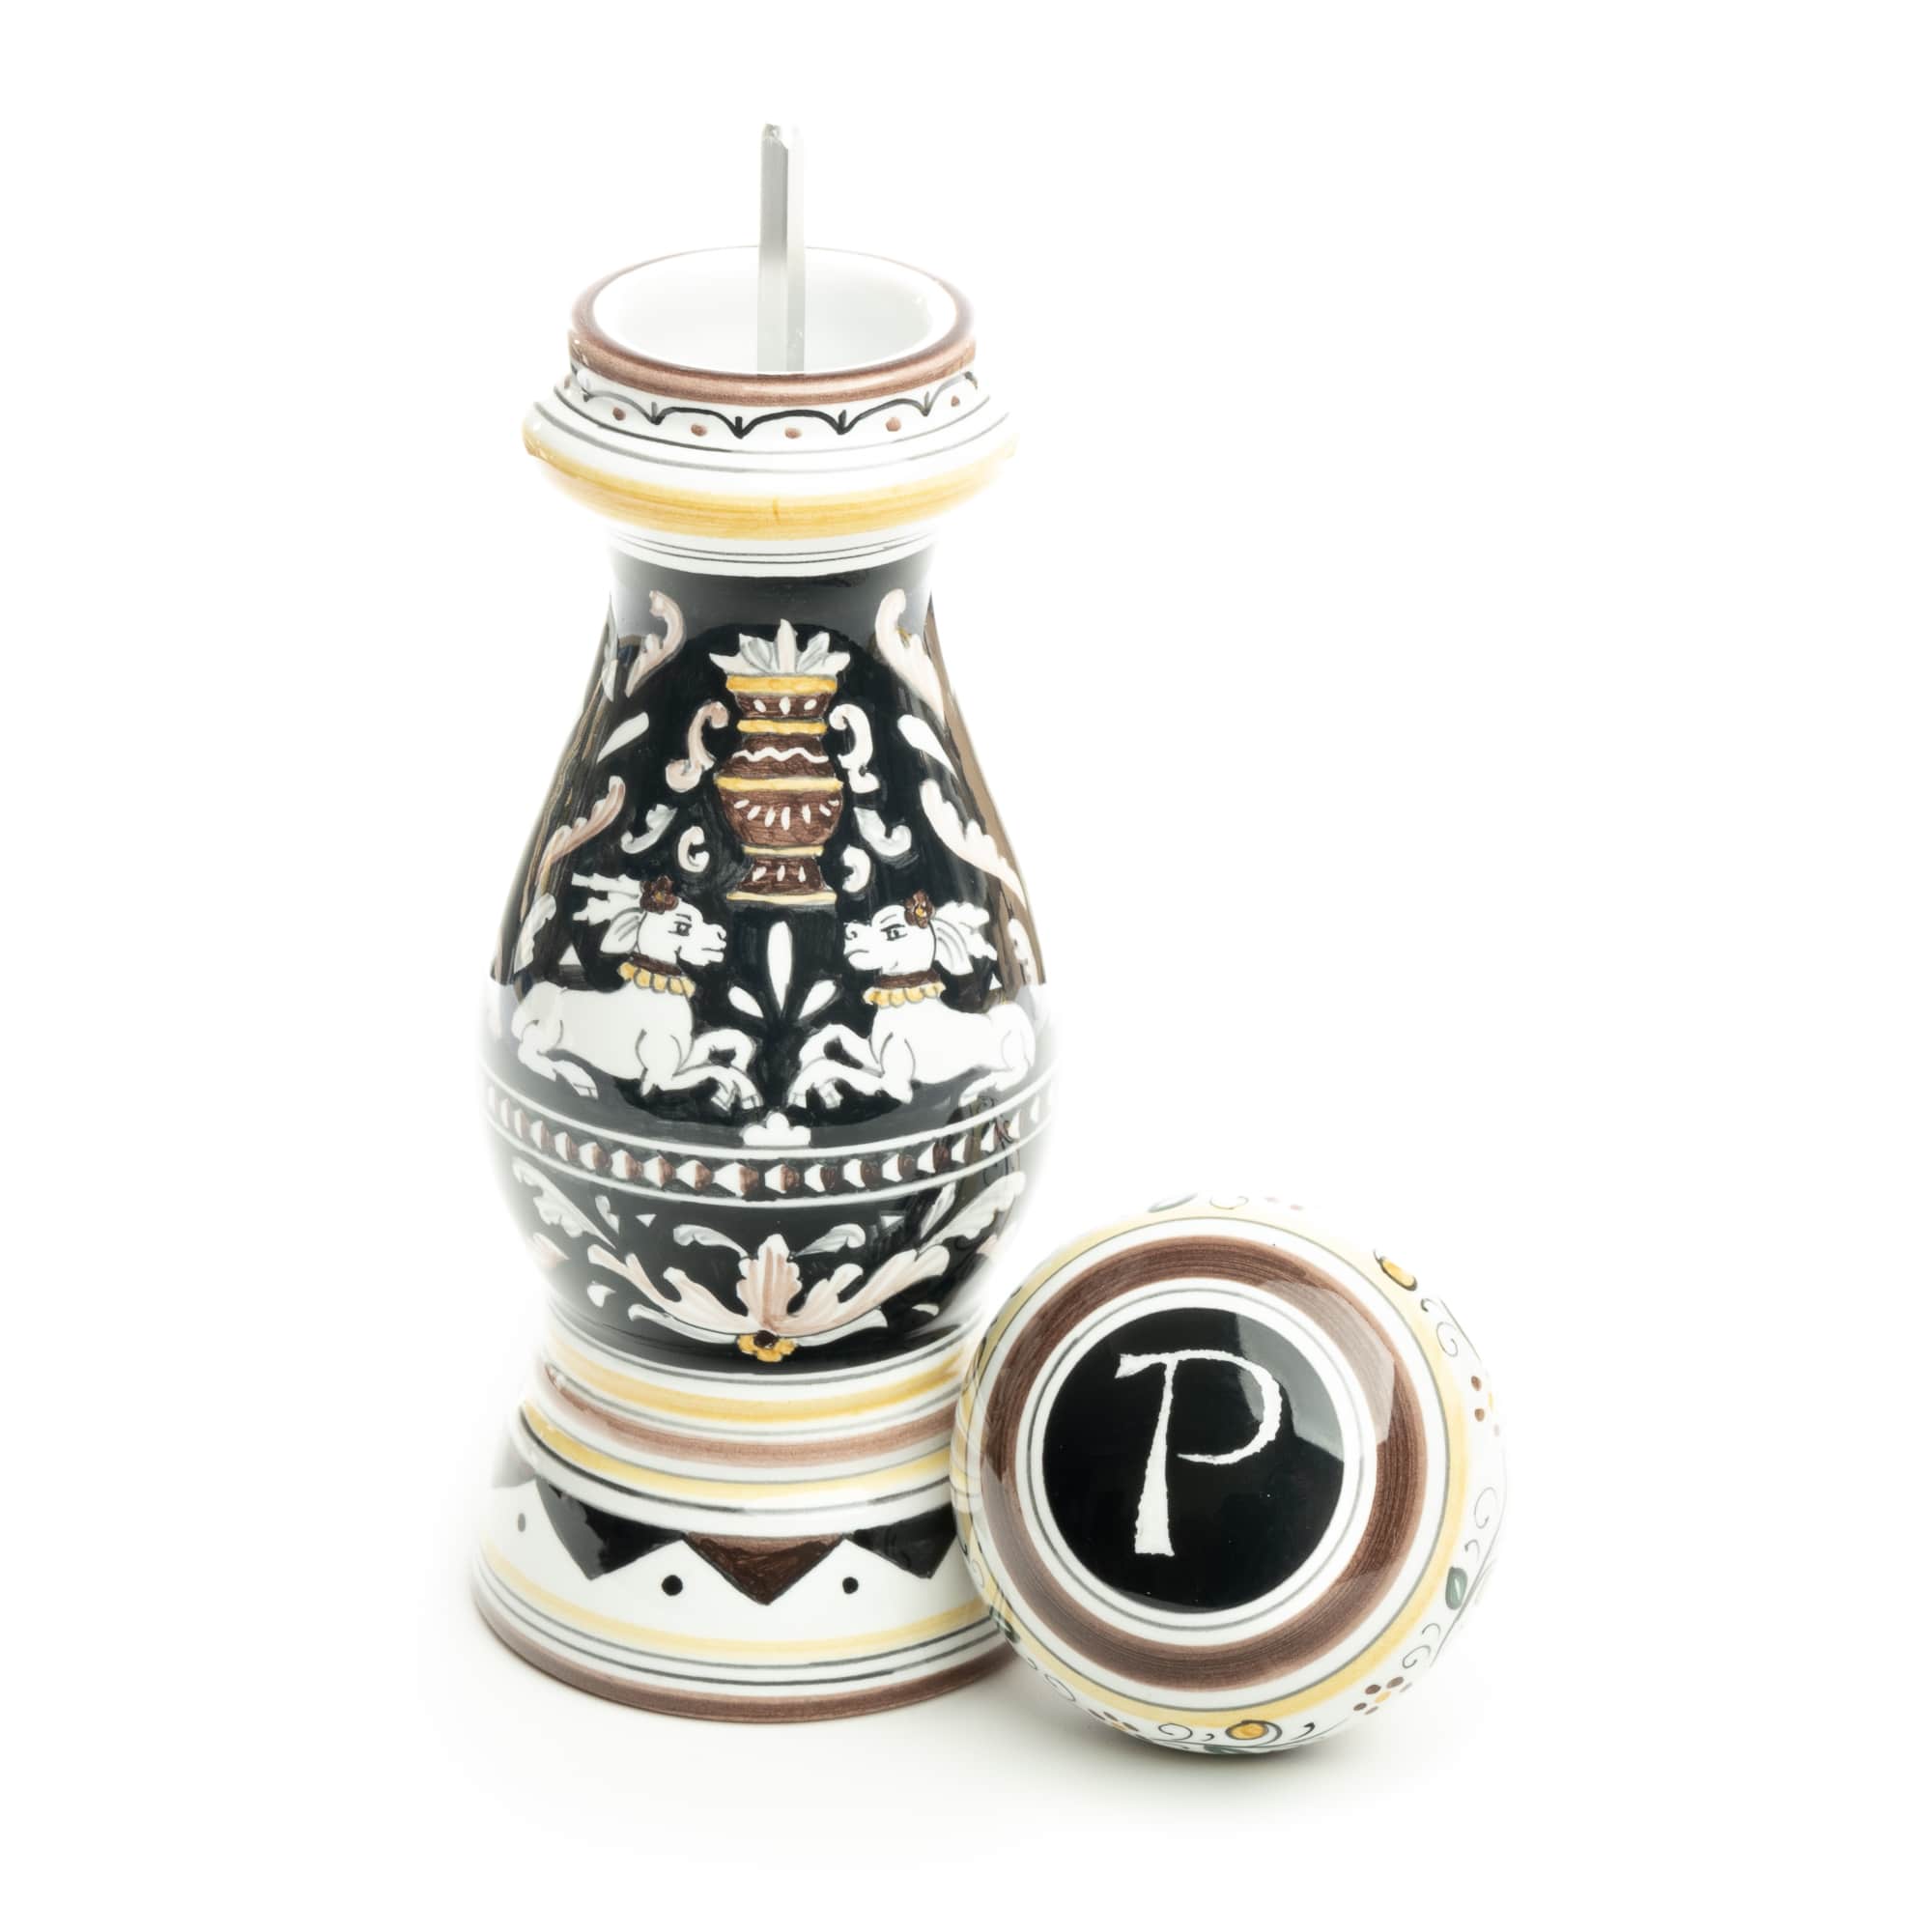 Siena - Pepper Grinder, ceramics, pottery, italian design, majolica, handmade, handcrafted, handpainted, home decor, kitchen art, home goods, deruta, majolica, Artisan, treasures, traditional art, modern art, gift ideas, style, SF, shop small business, artists, shop online, landmark store, legacy, one of a kind, limited edition, gift guide, gift shop, retail shop, decorations, shopping, italy, home staging, home decorating, home interiors